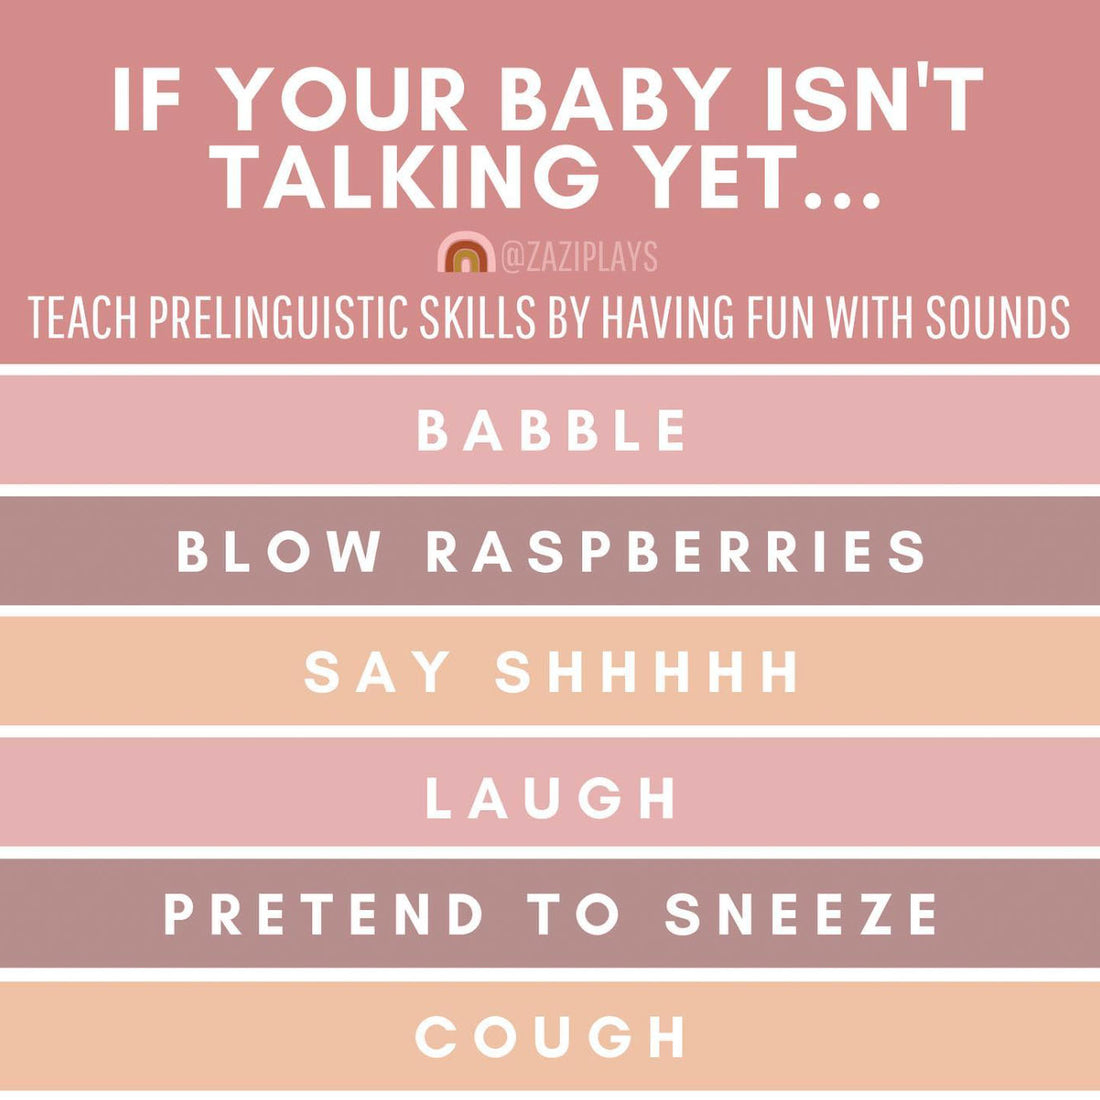 If your baby isn't talking yet